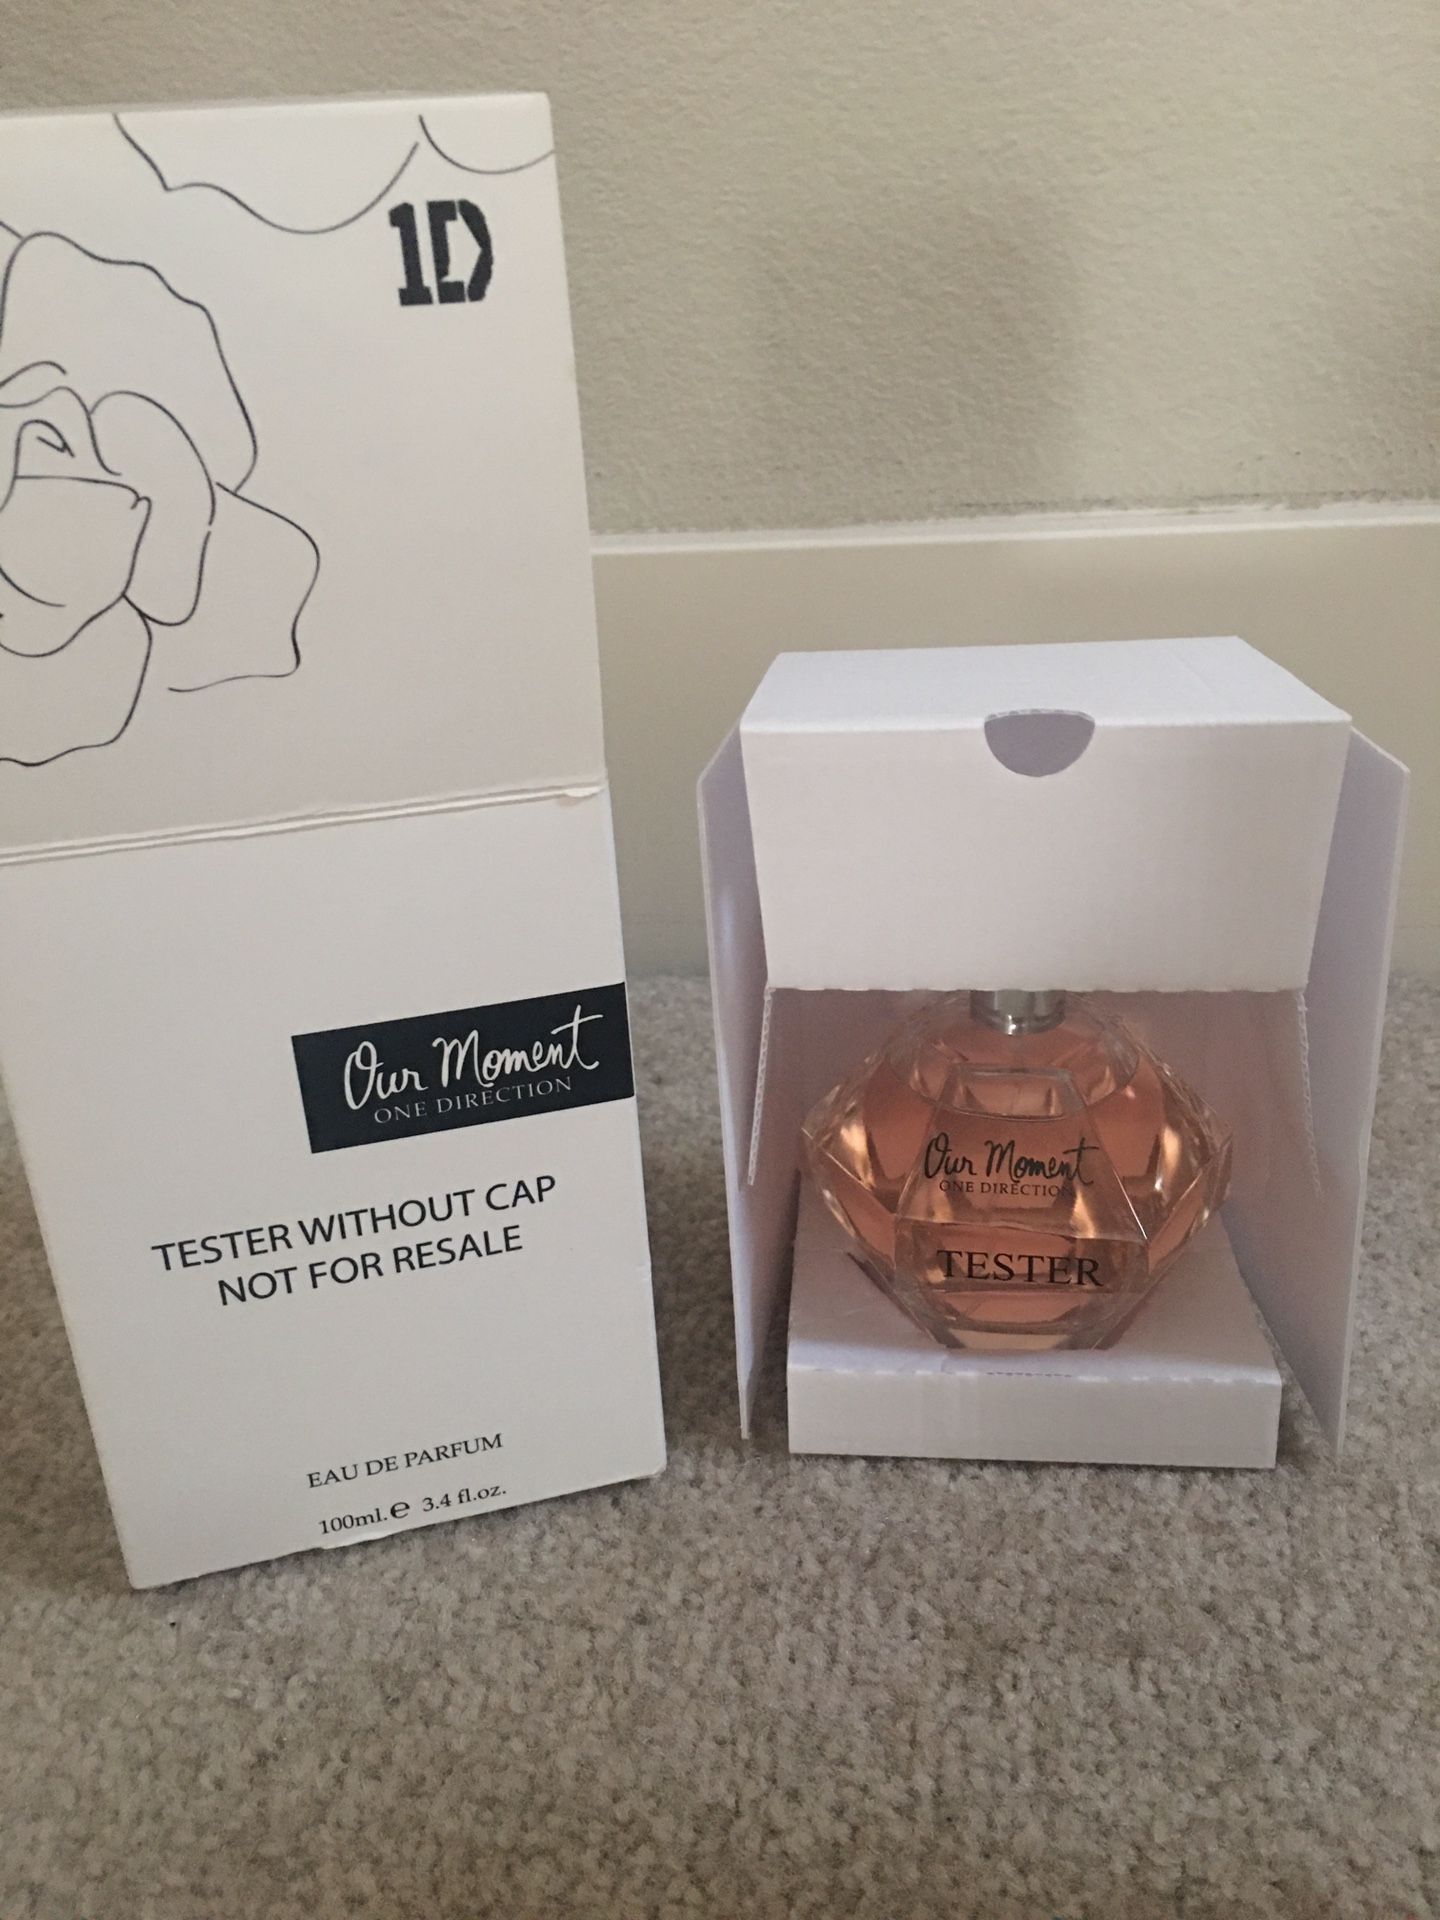 Brand new One Direction perfume (our moment) 3.4 oz